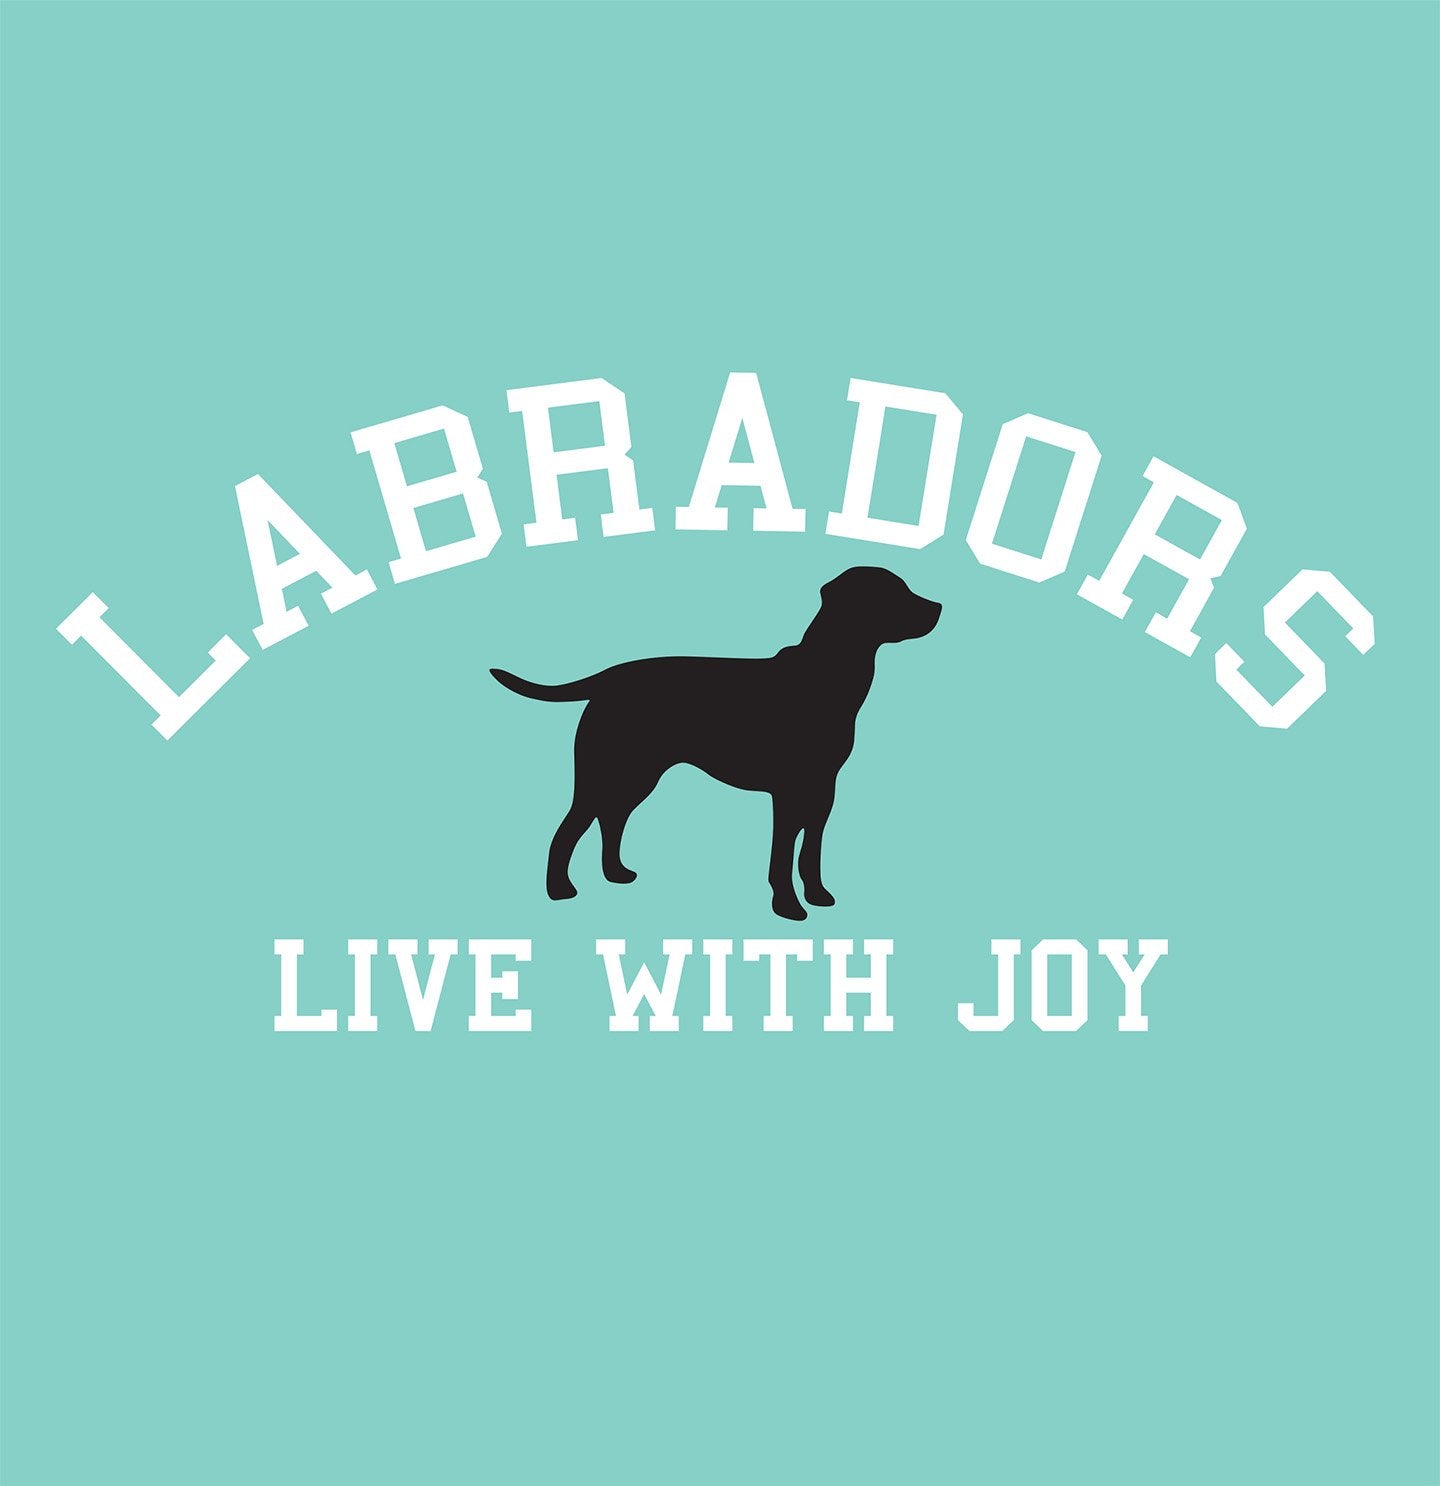 Labradors Live With Joy on Teal - Ladies Polyester Houndstooth Hat